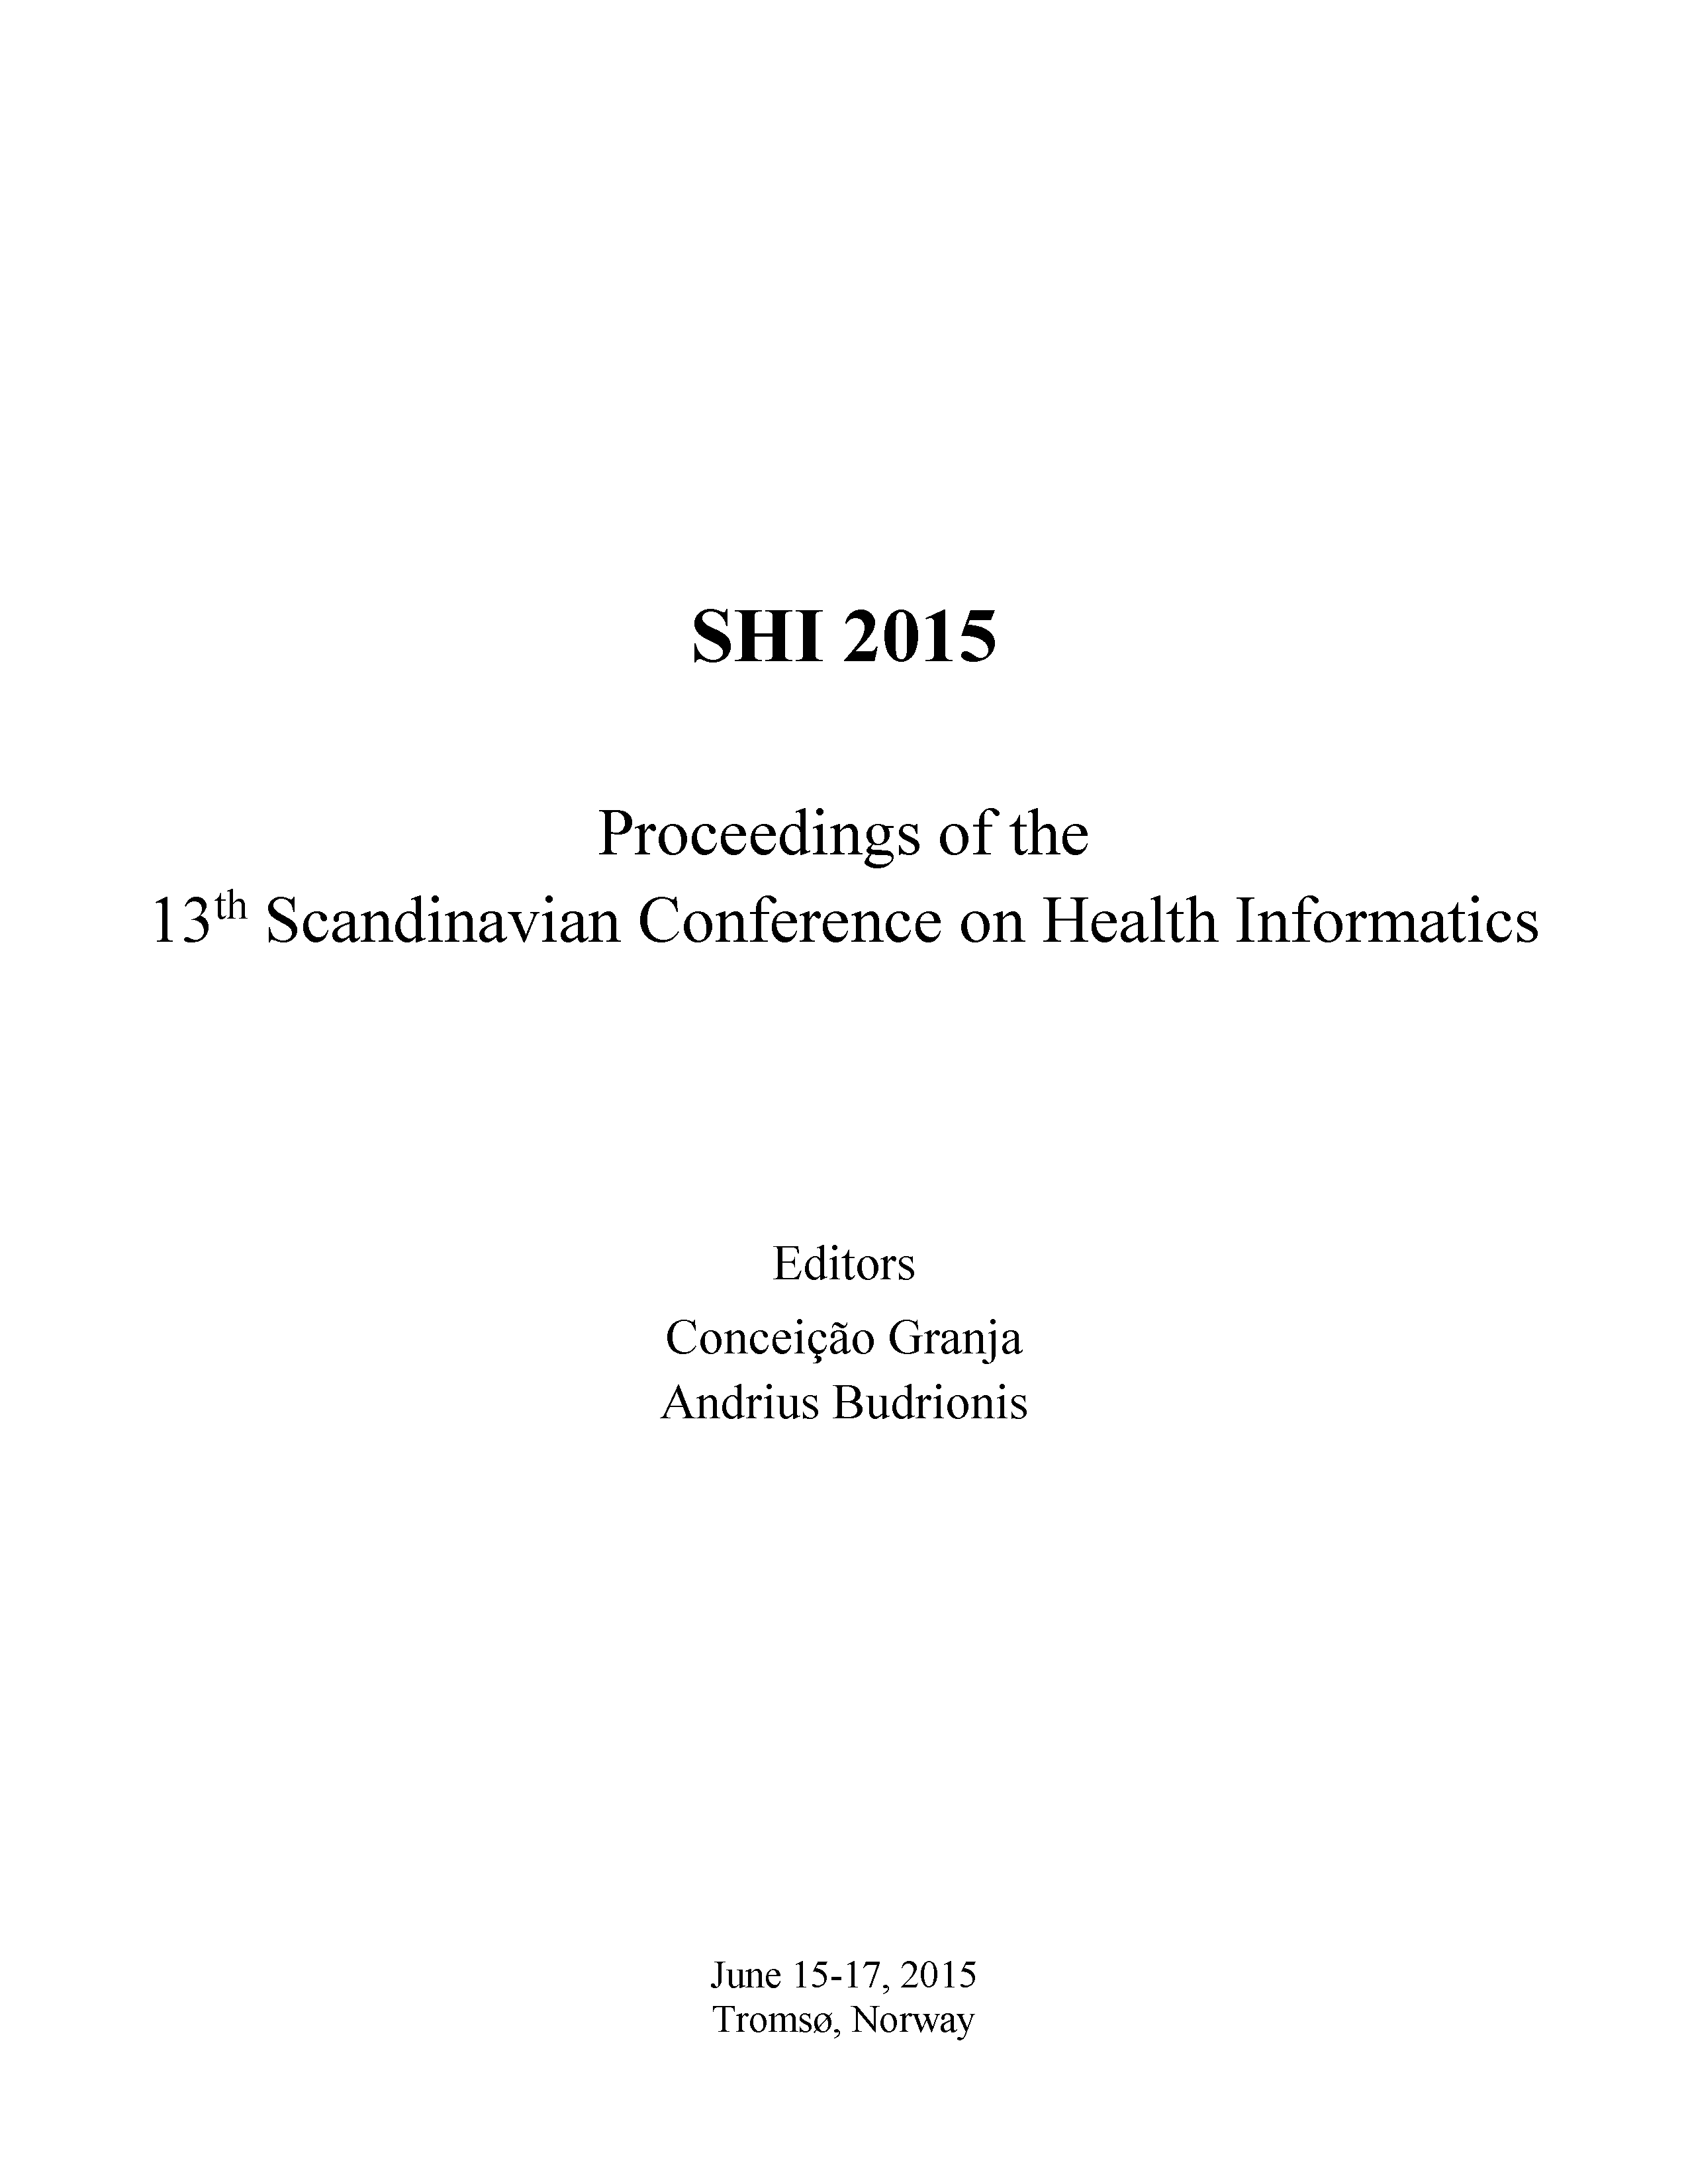 					View SHI 2015, Proceedings from The 13th Scandinavien Conference on Health Informatics, June 15-17, 2015, Tromsø, Norway
				